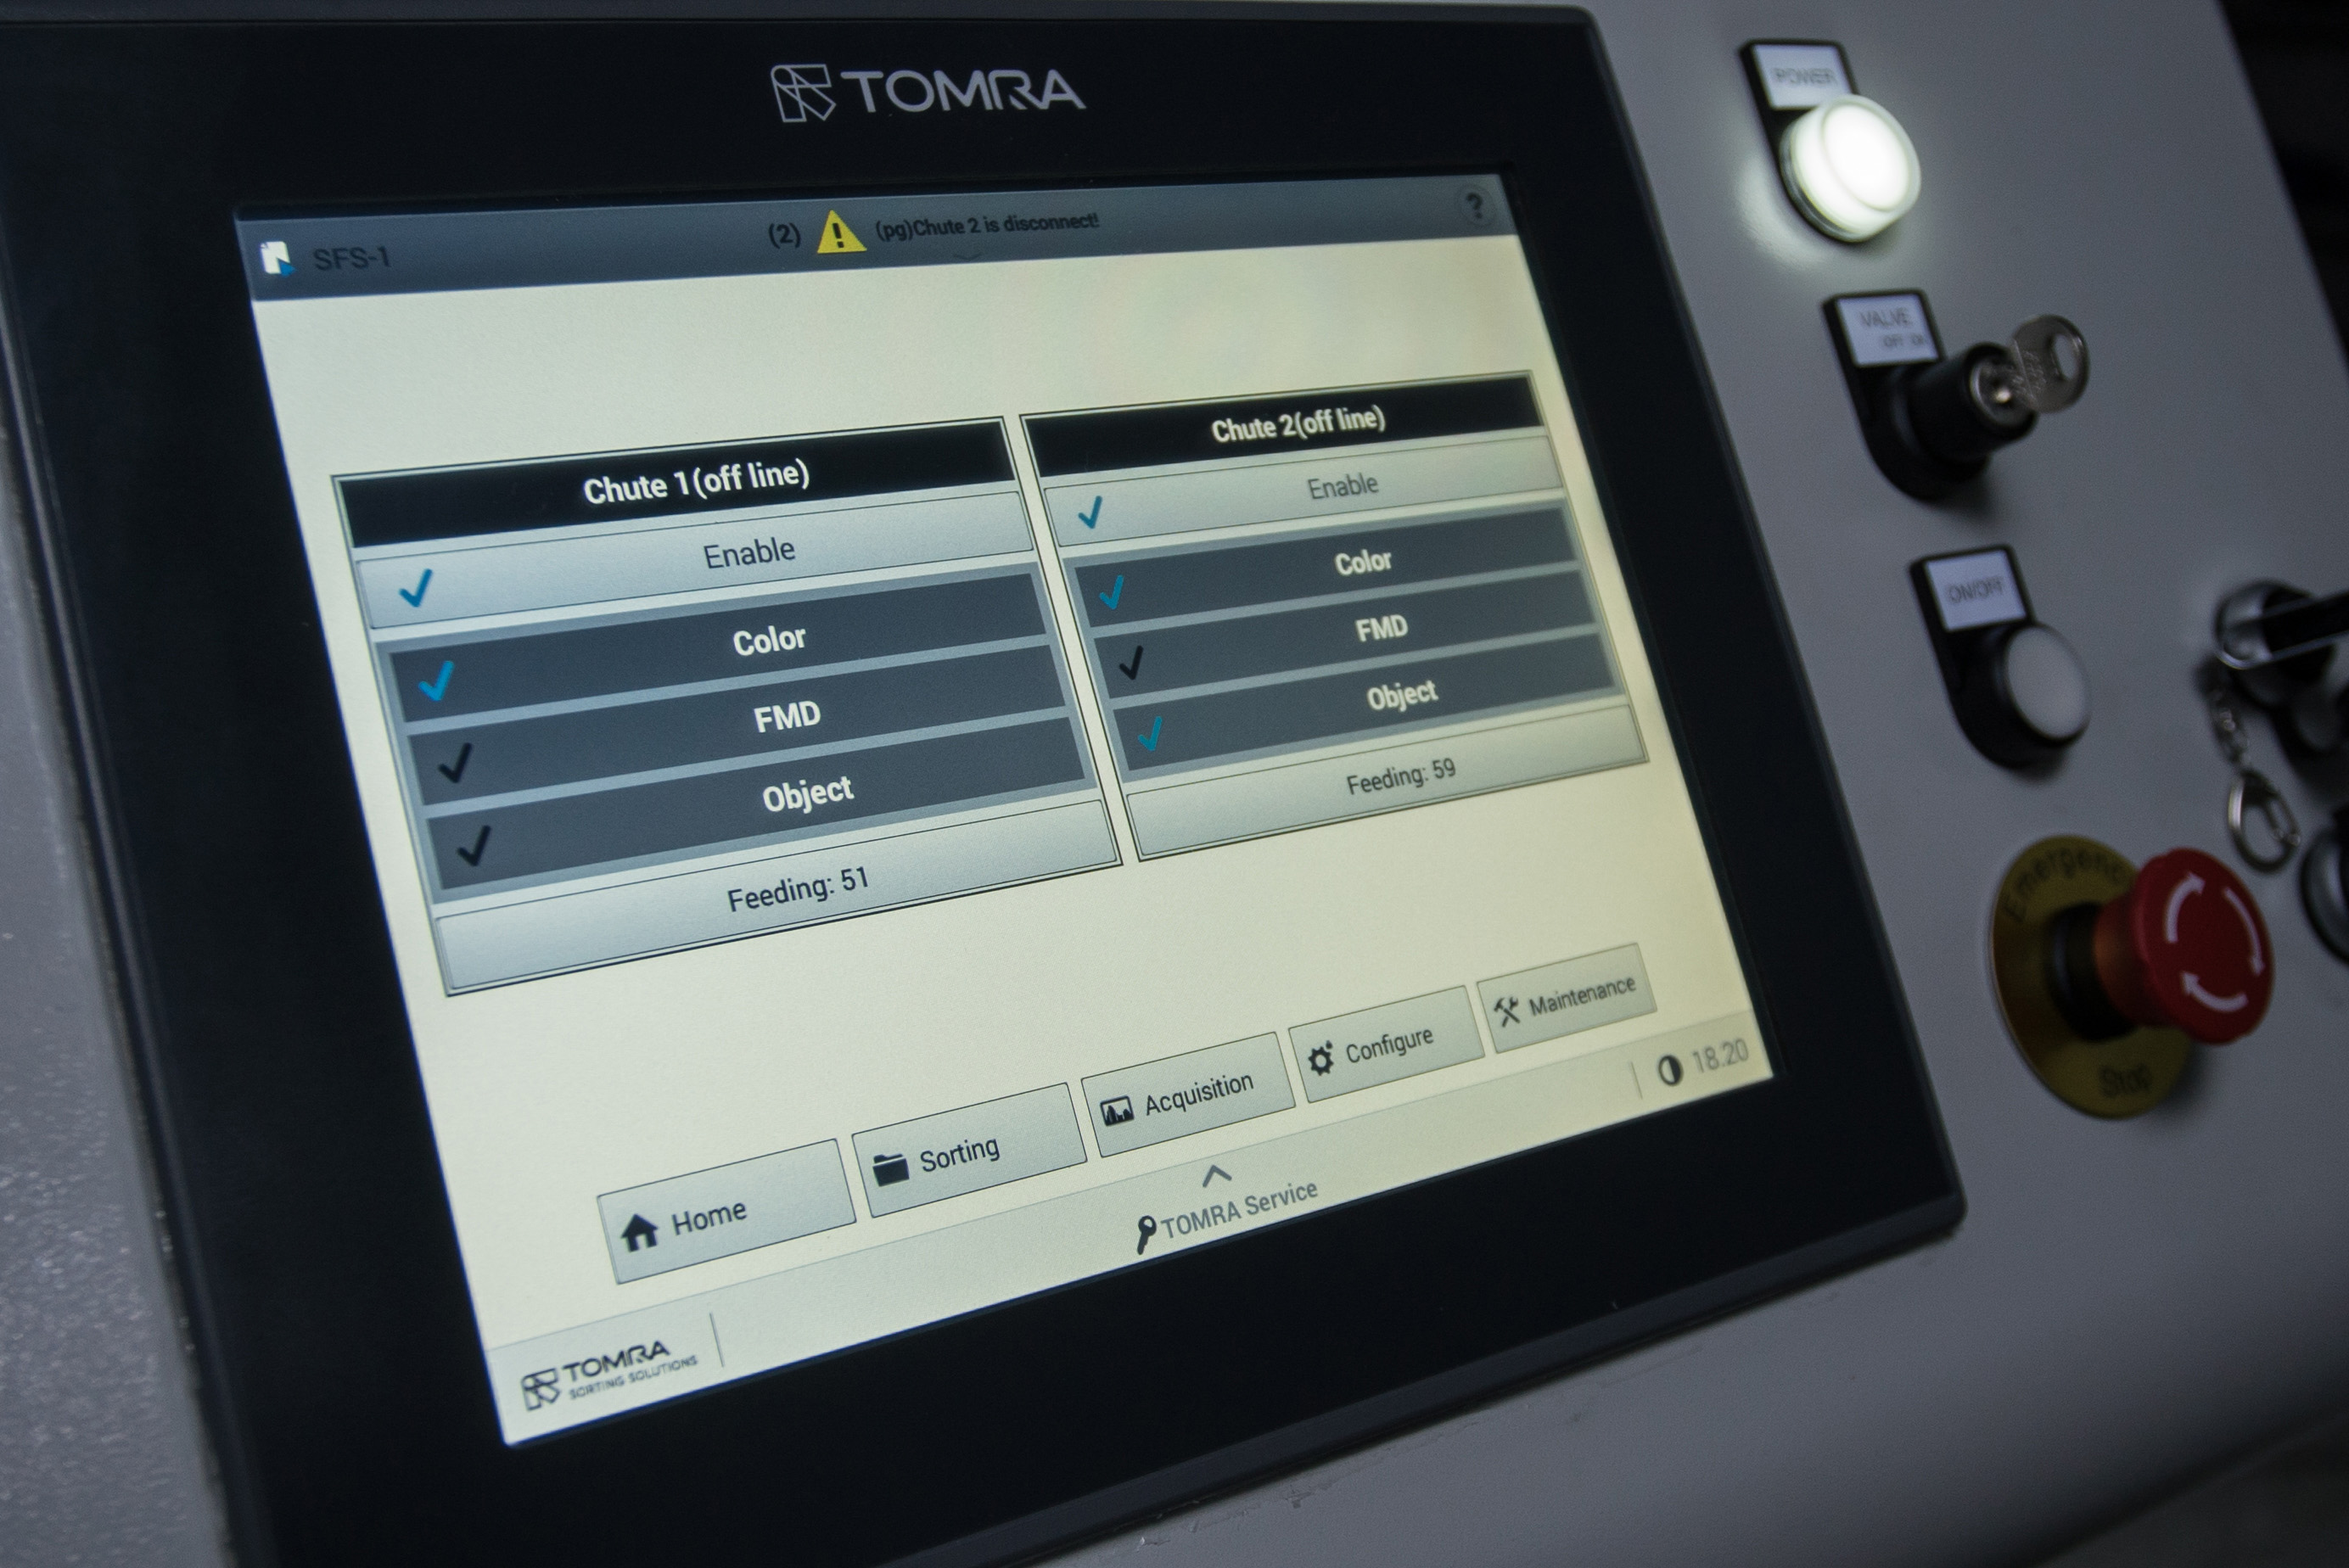 TOMRA TO PRESENT TOMRA 3C OPTICAL SORTER AT THE ALMOND CONFERENCE 2019: A GROUND-BREAKING SOLUTION FOR THE HULLING AND SHELLING SECTOR